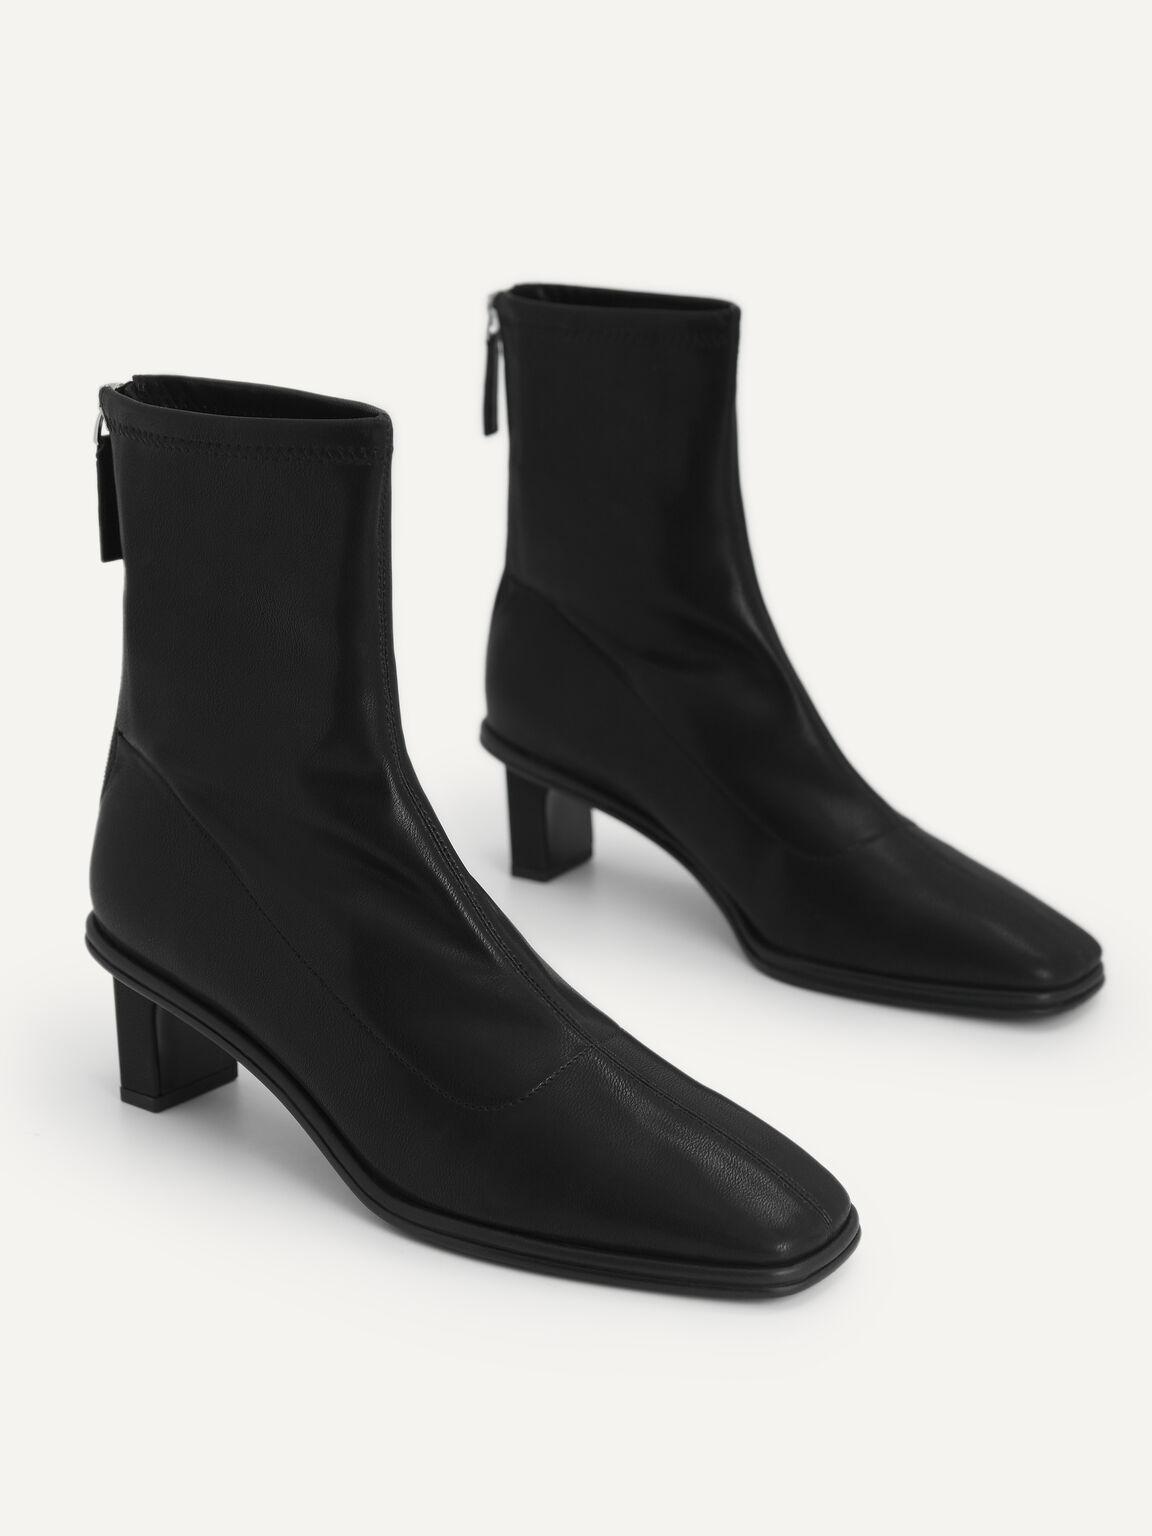 Heeled Ankle Boots, Black